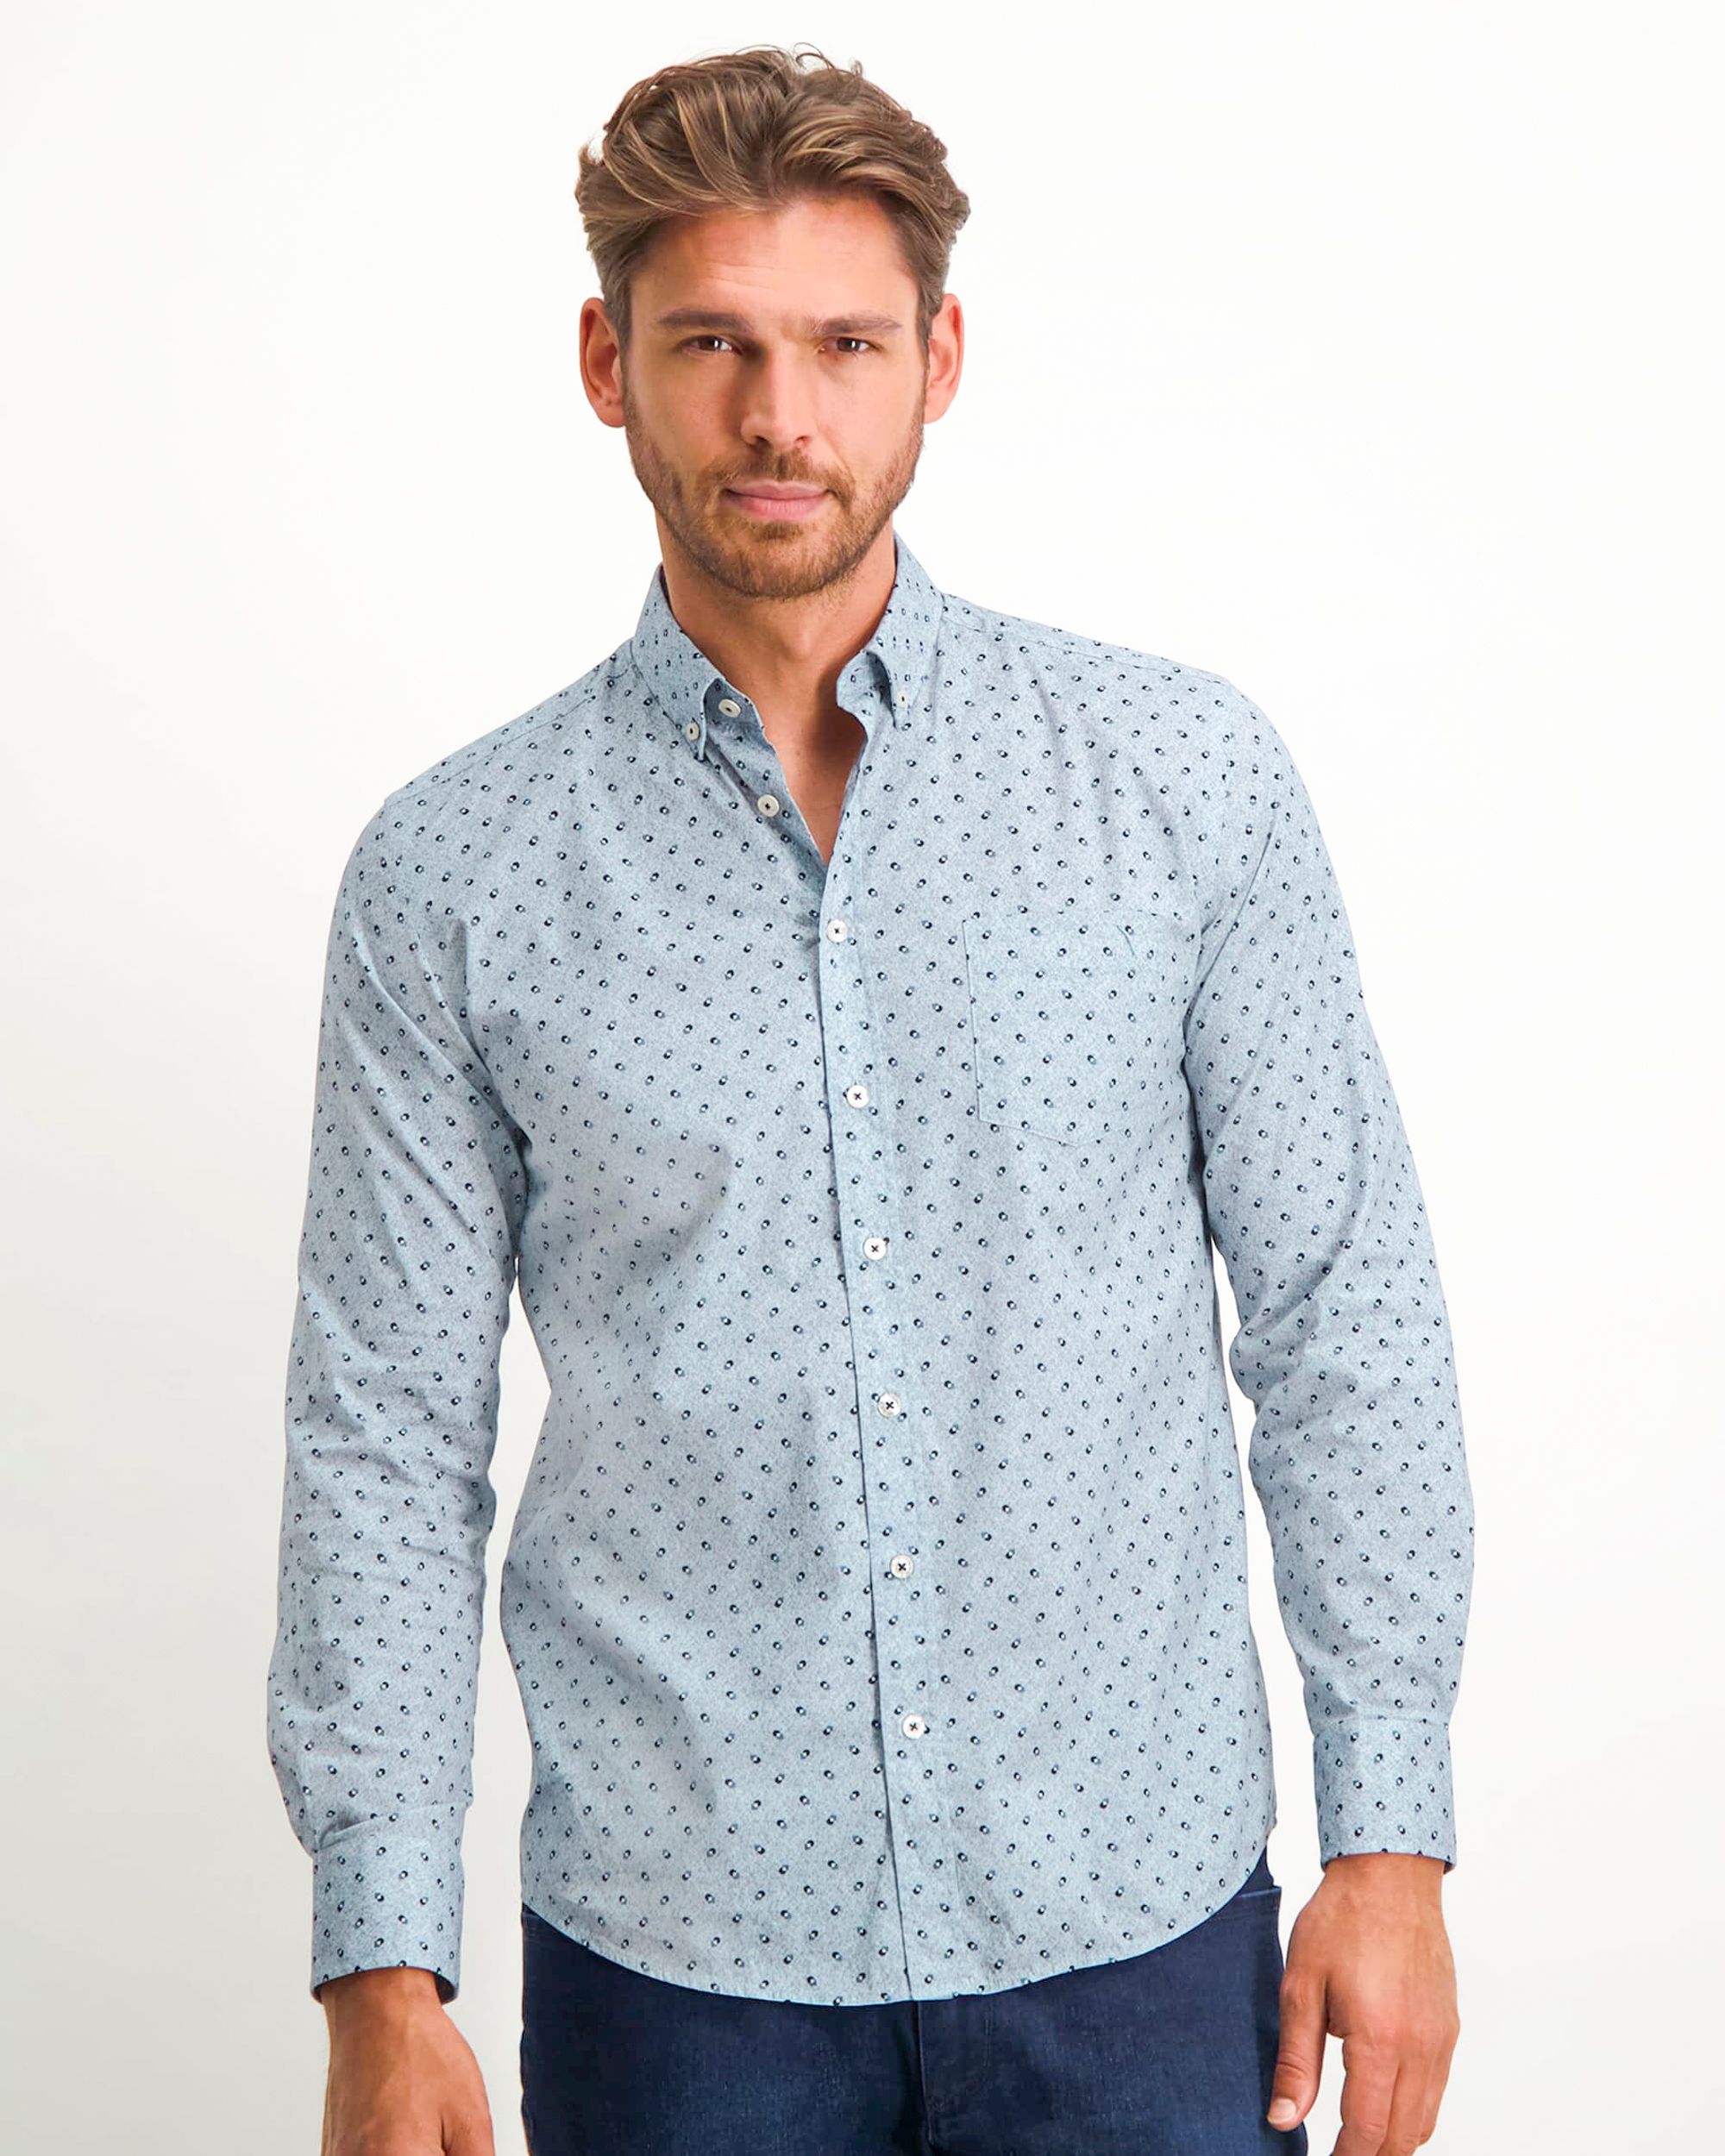 State of Art Casual Overhemd LM Donker blauw 081082-001-4XL